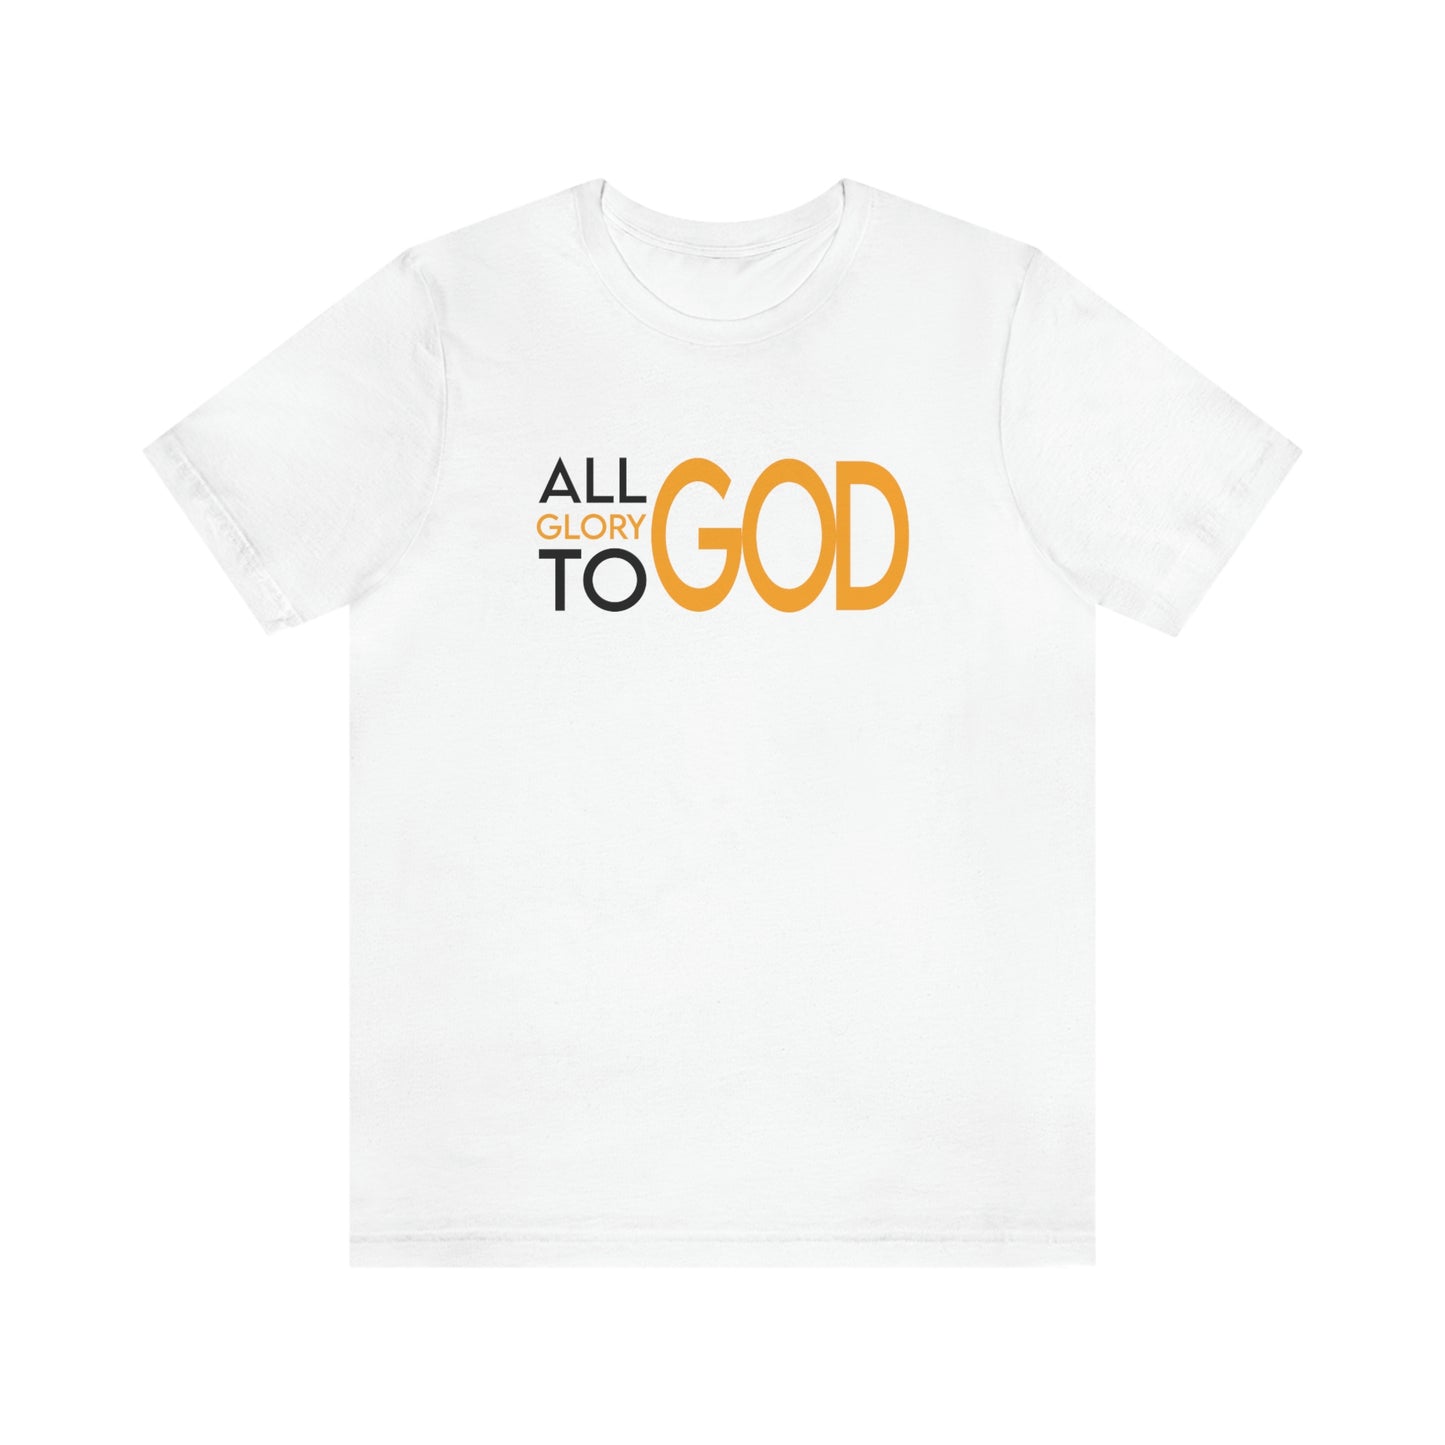 Ben Stanley: All Glory to God Tee